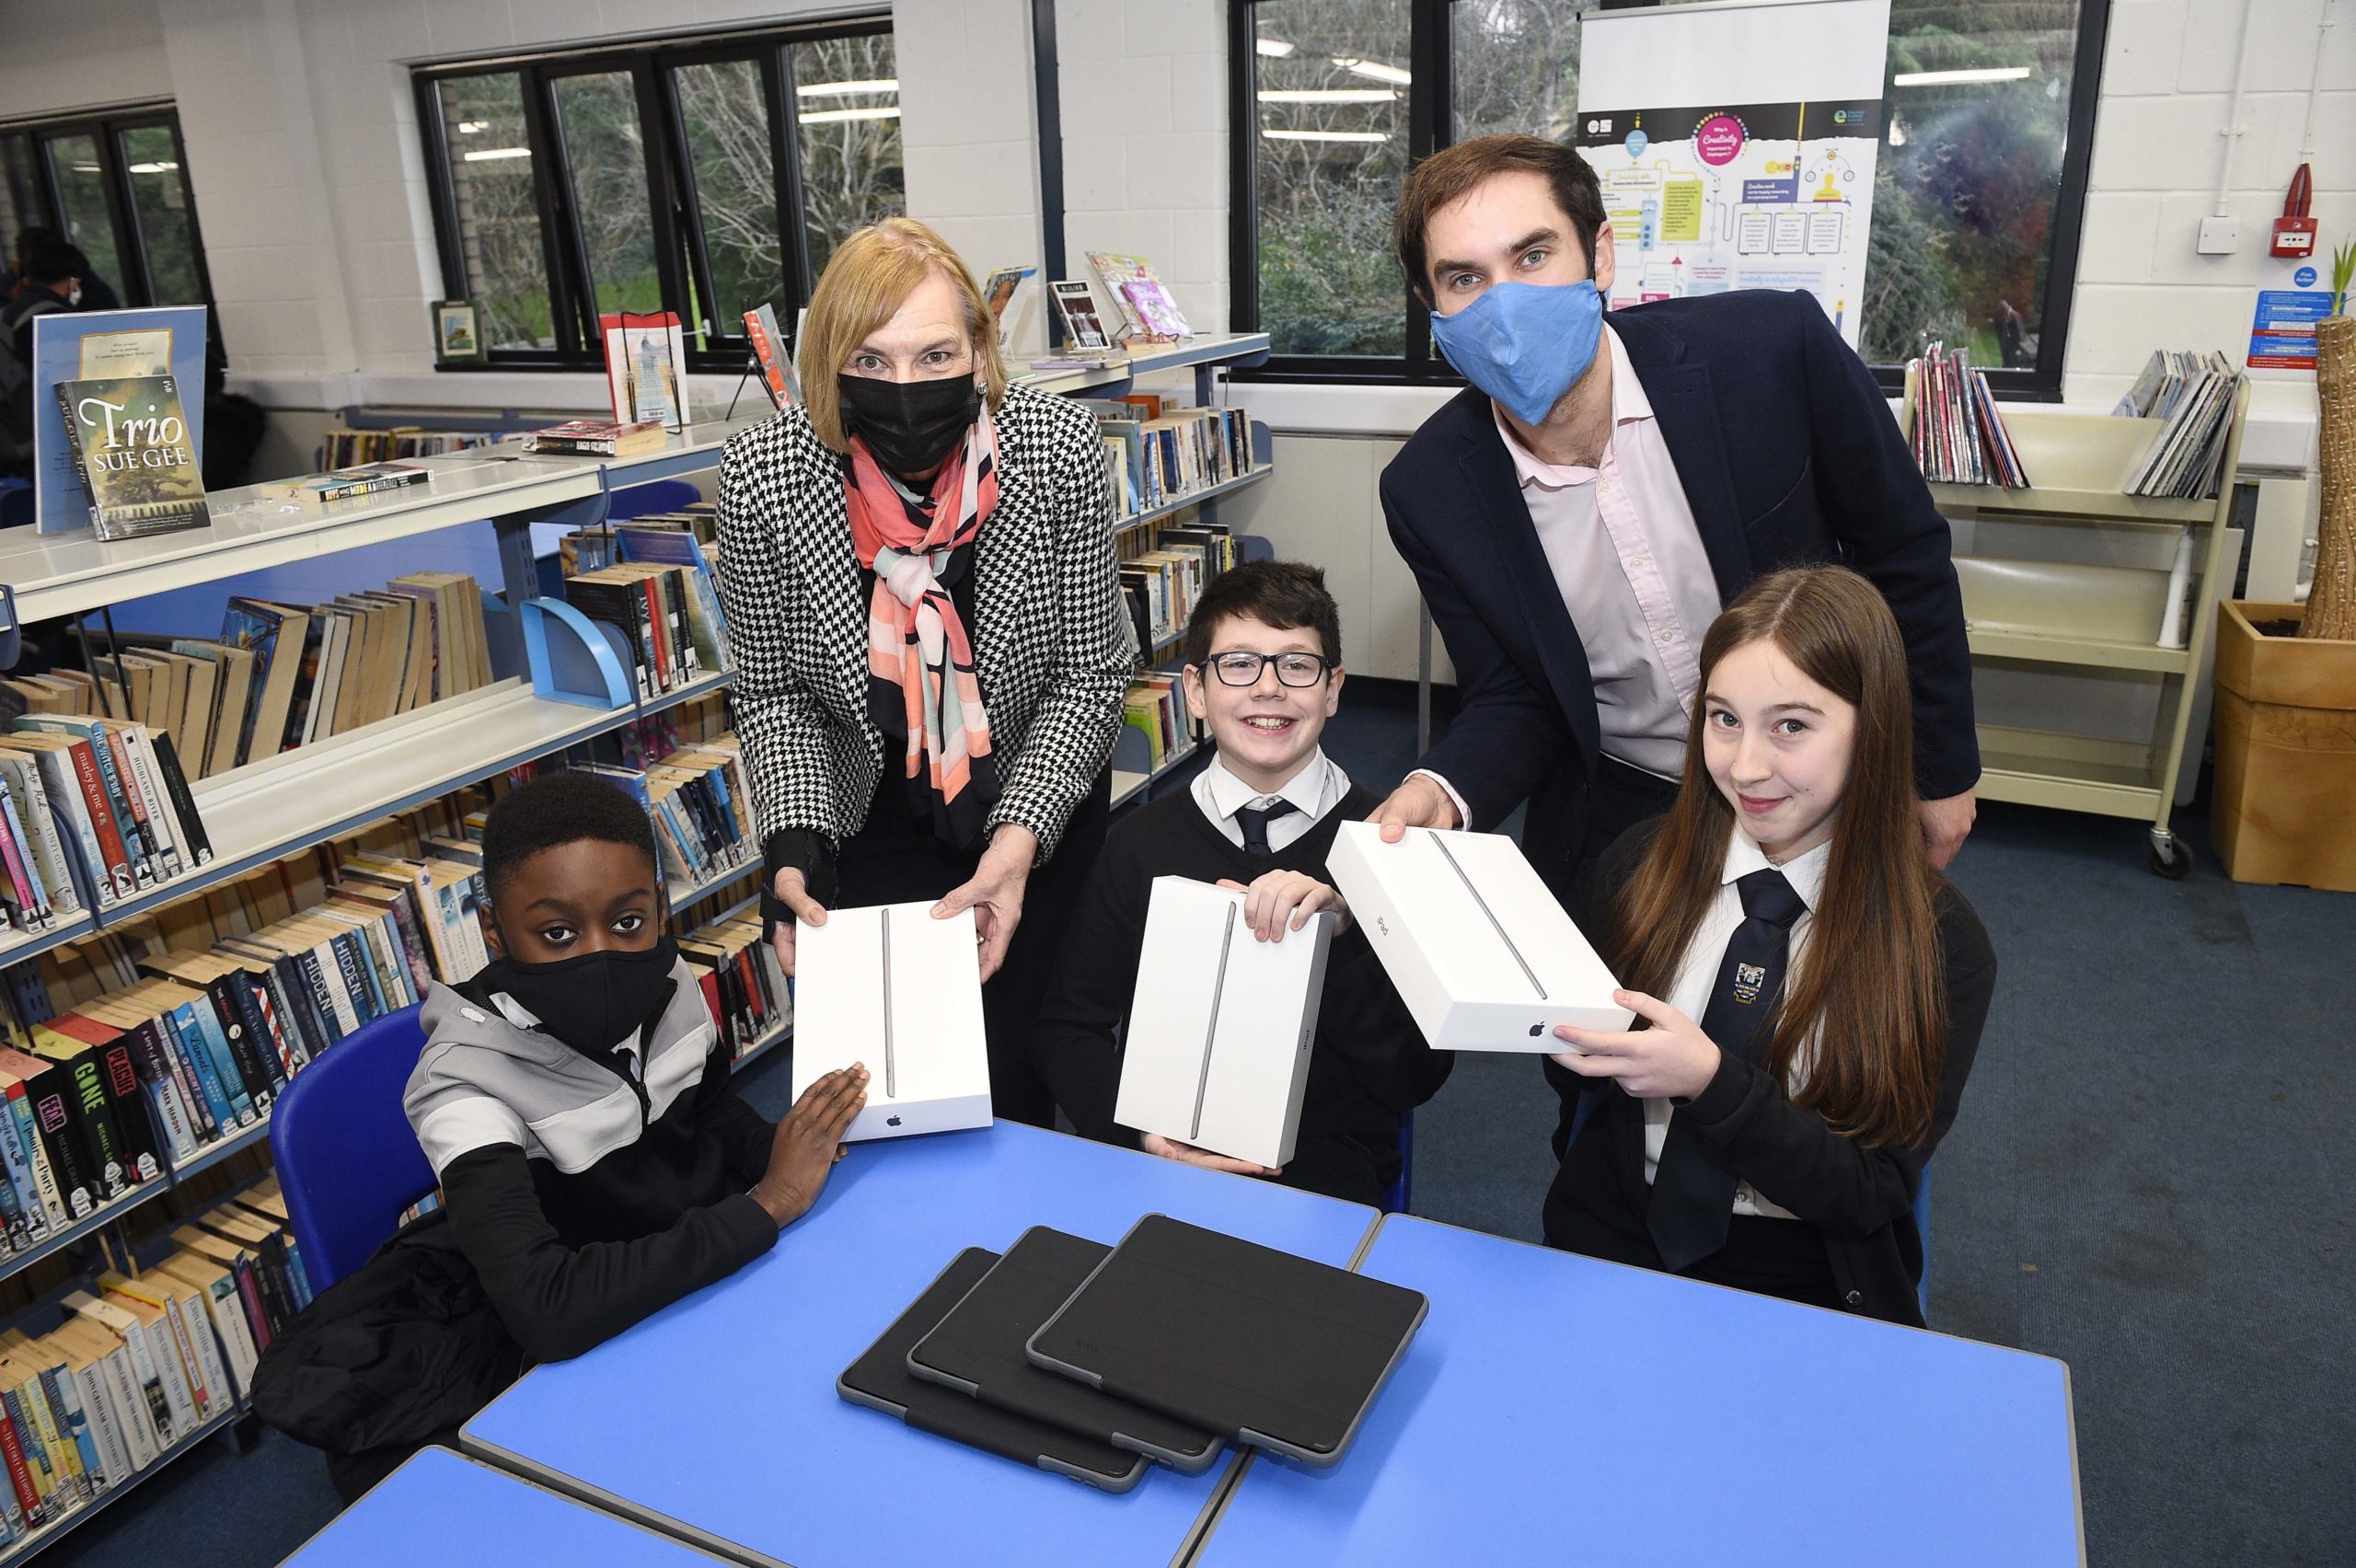 Roll Out of Digital Devices for Pupils Underway